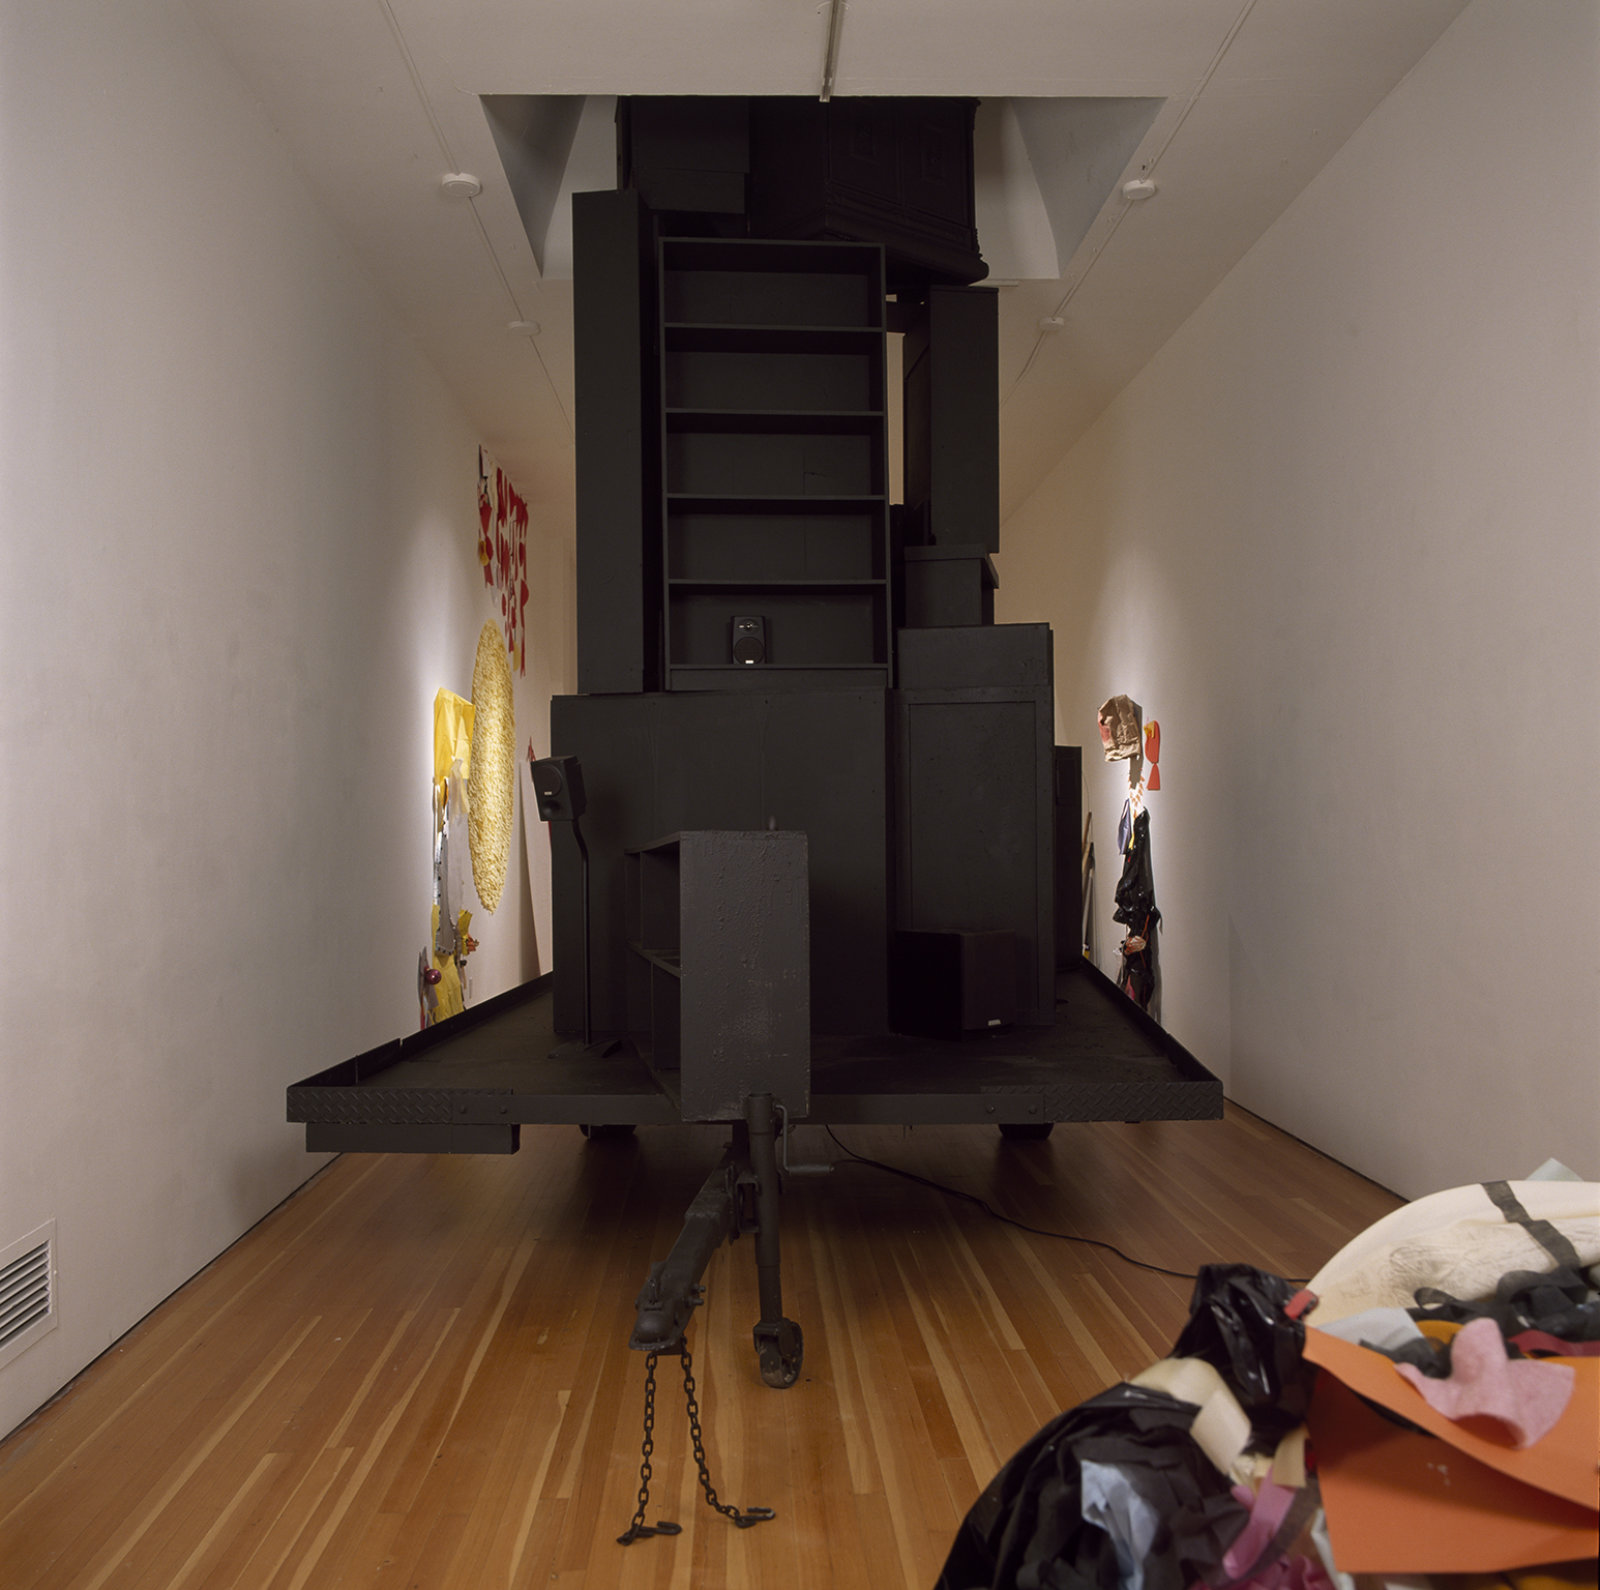 Geoffrey Farmer, Every surface in someway decorated, altered, or changed forever (except the float), 2004, mixed media, dimensions variable